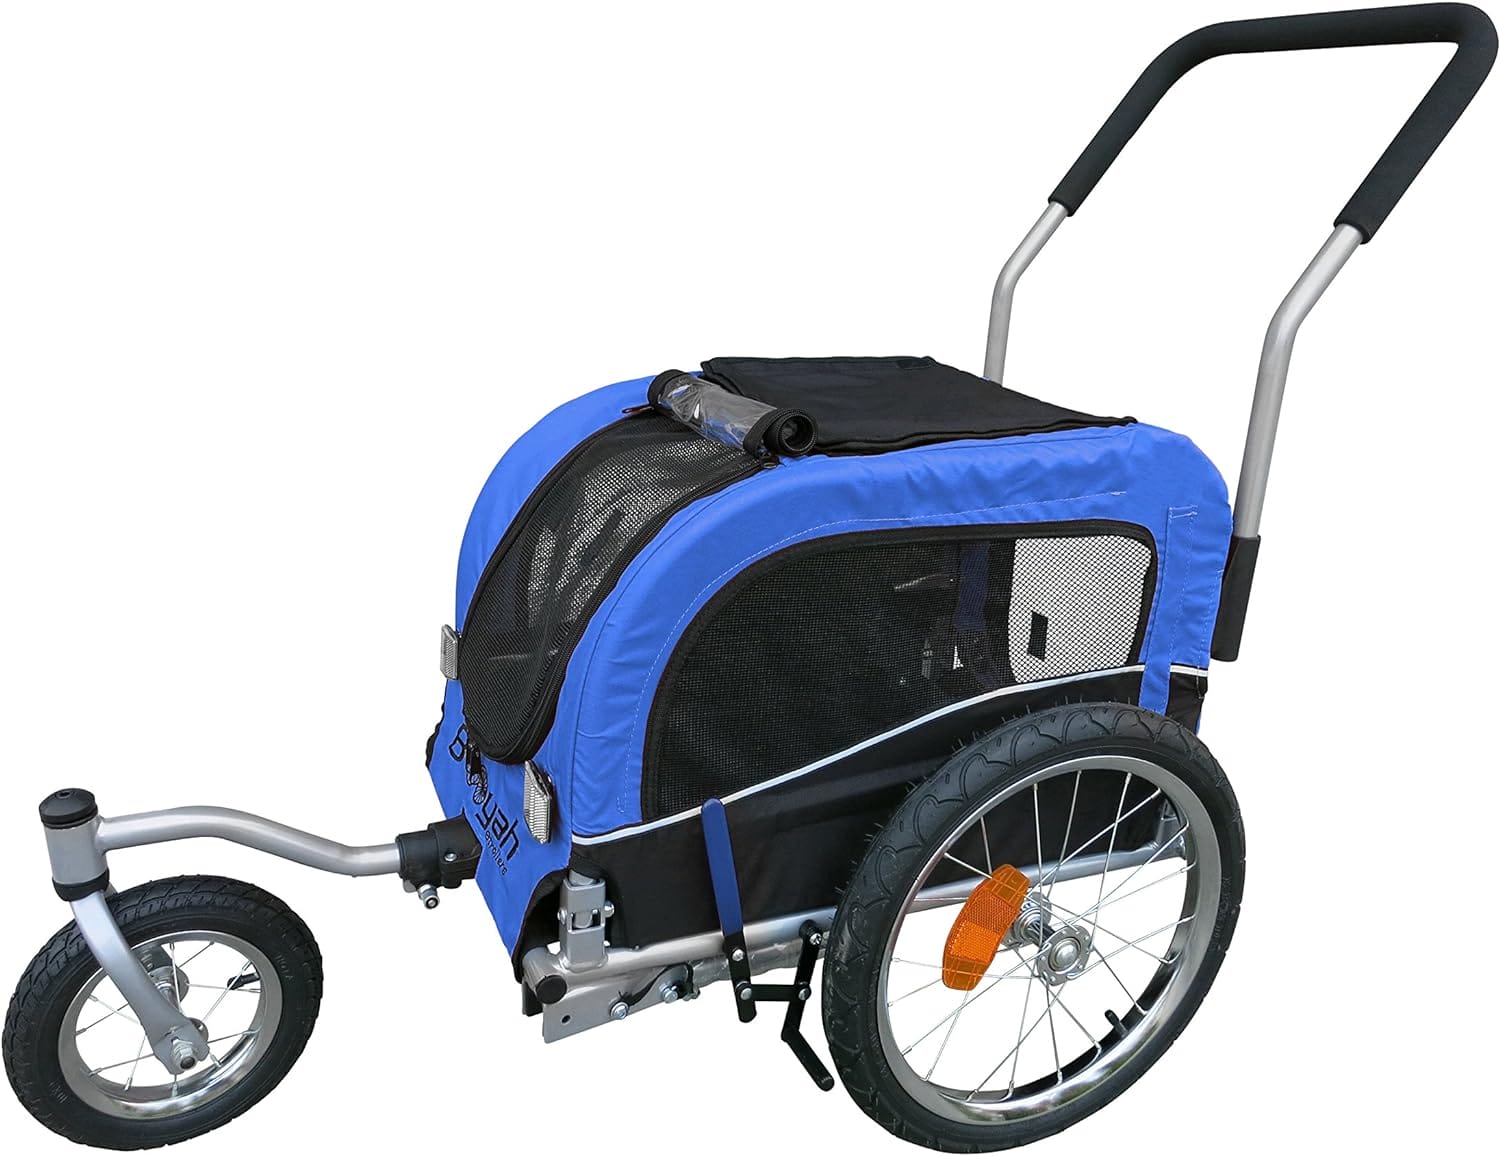 Small Pet Dog Stroller and Bike Bicycle Trailer (Blue) Review